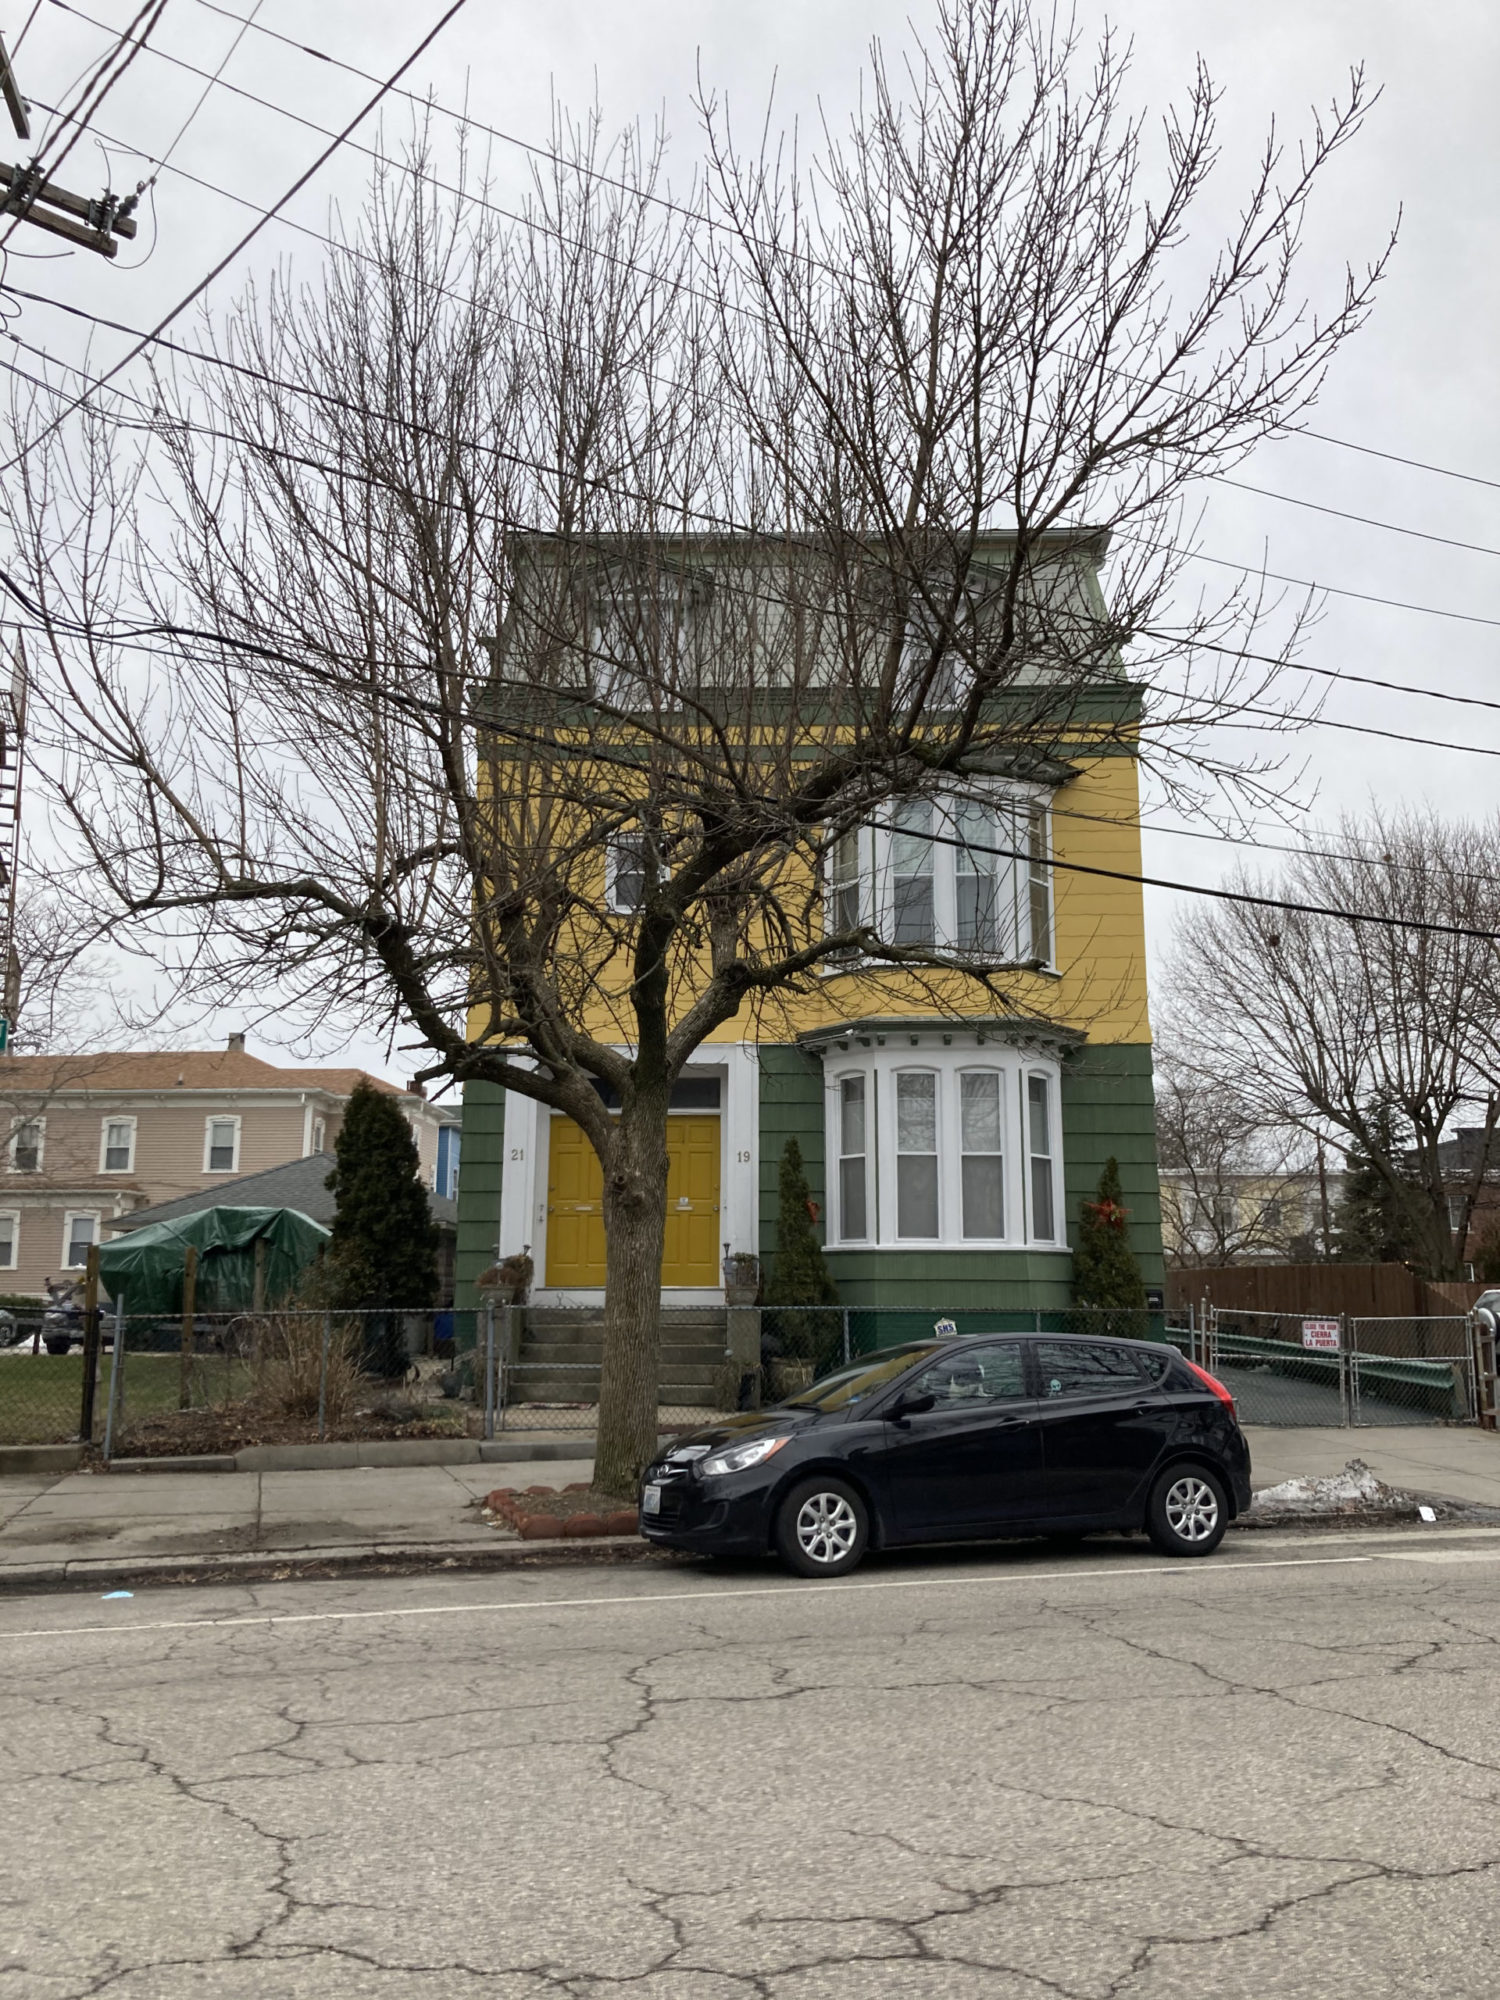 A straight on shot of a multi story house painted yellow and dark green. The front door is yellow and on the left side of the front of the house, above a few stairs. There is a tree directly in front of the house. There are two bay windows on different stories on the right side of the house.